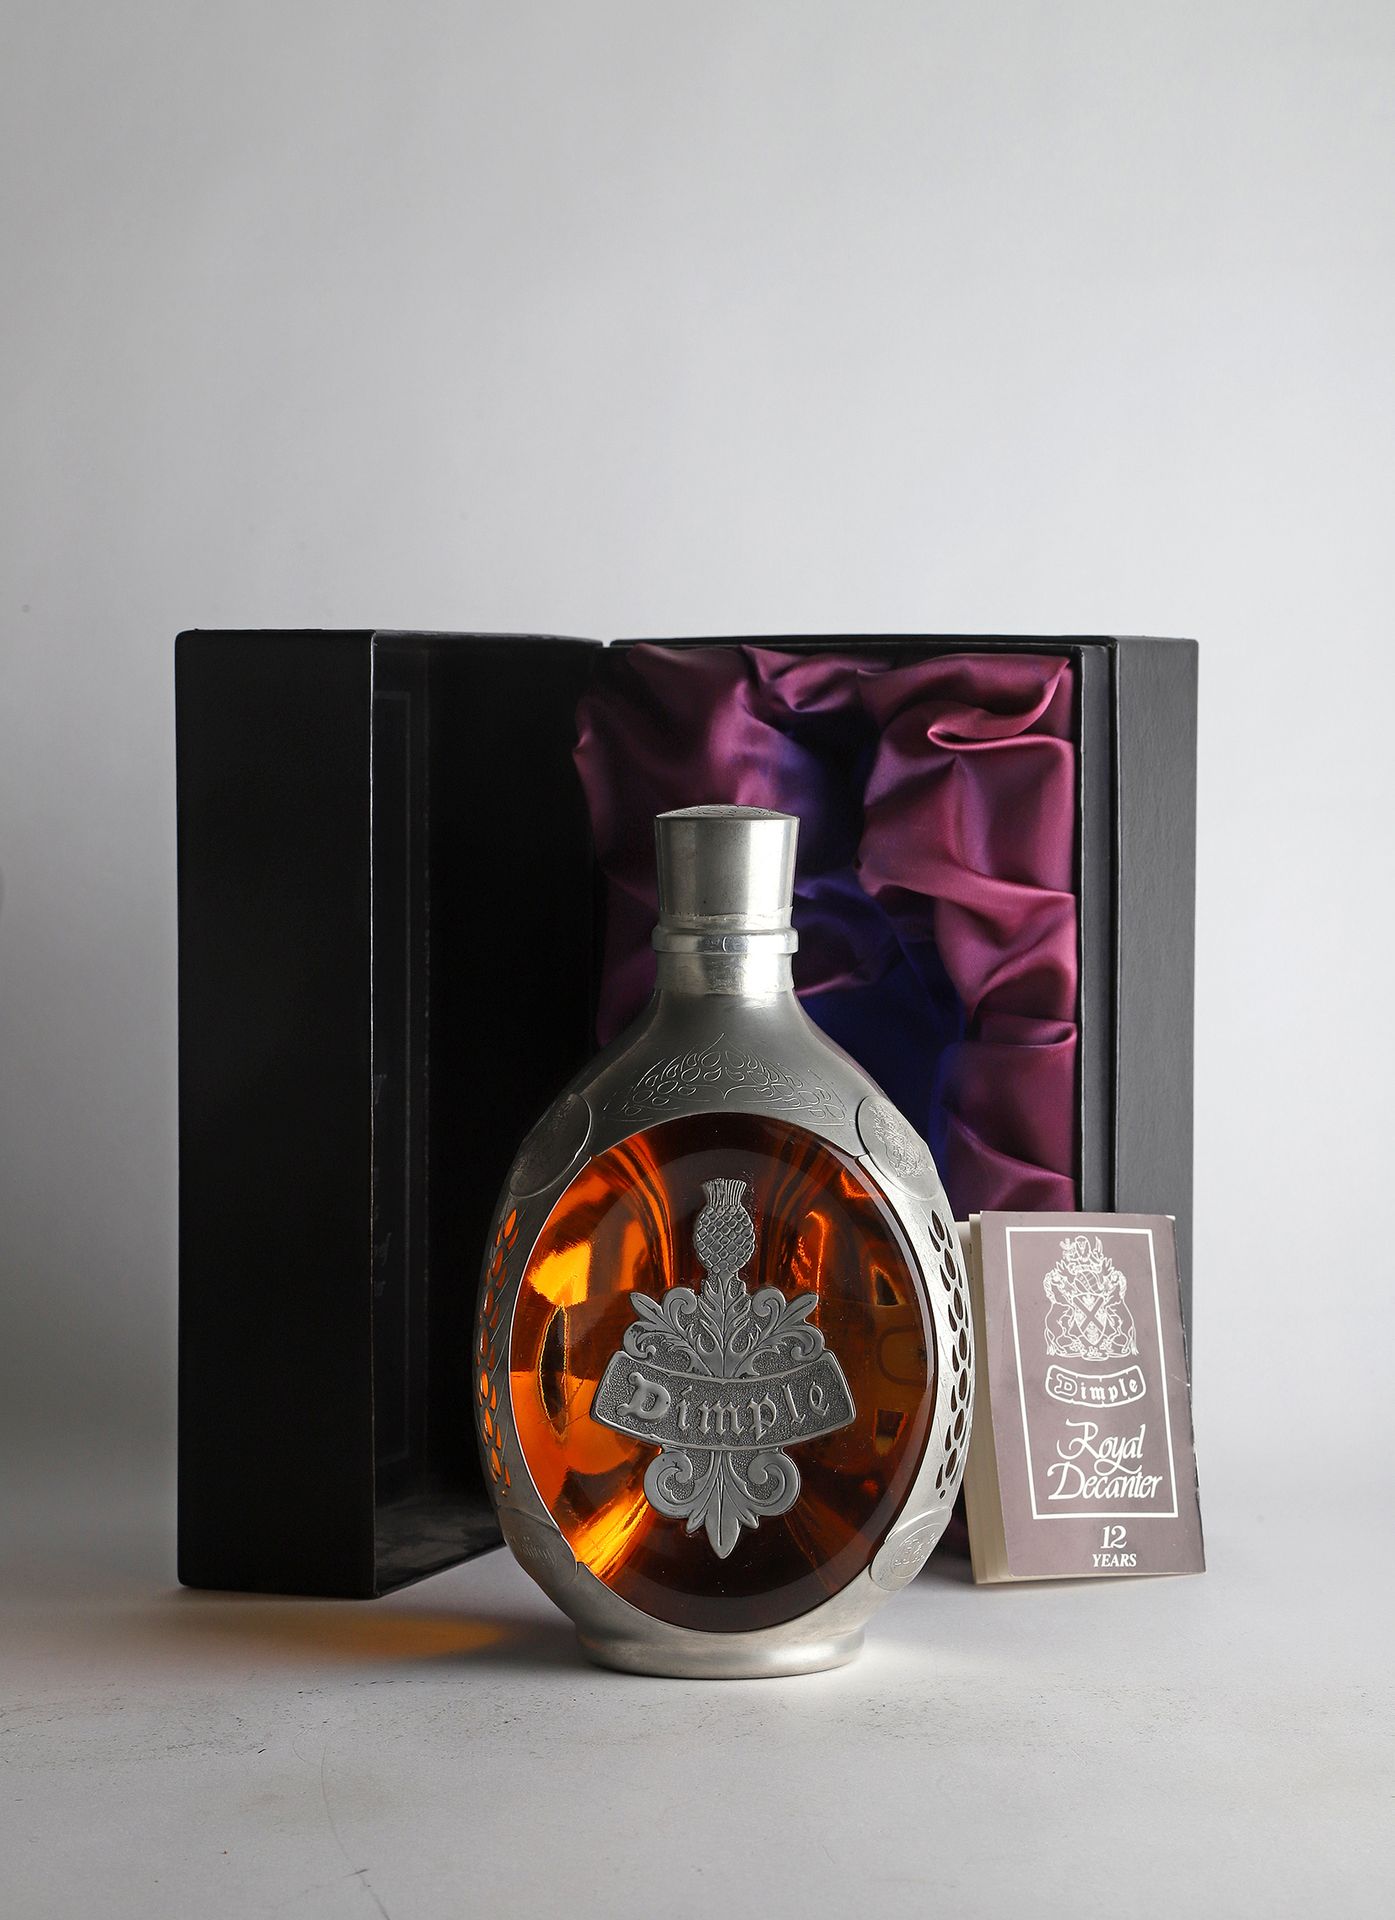 Null 1 B WHISKY ROYAL DECANTER 12 YEARS OLD 75 cl 43% (scatola originale) - NM -&hellip;